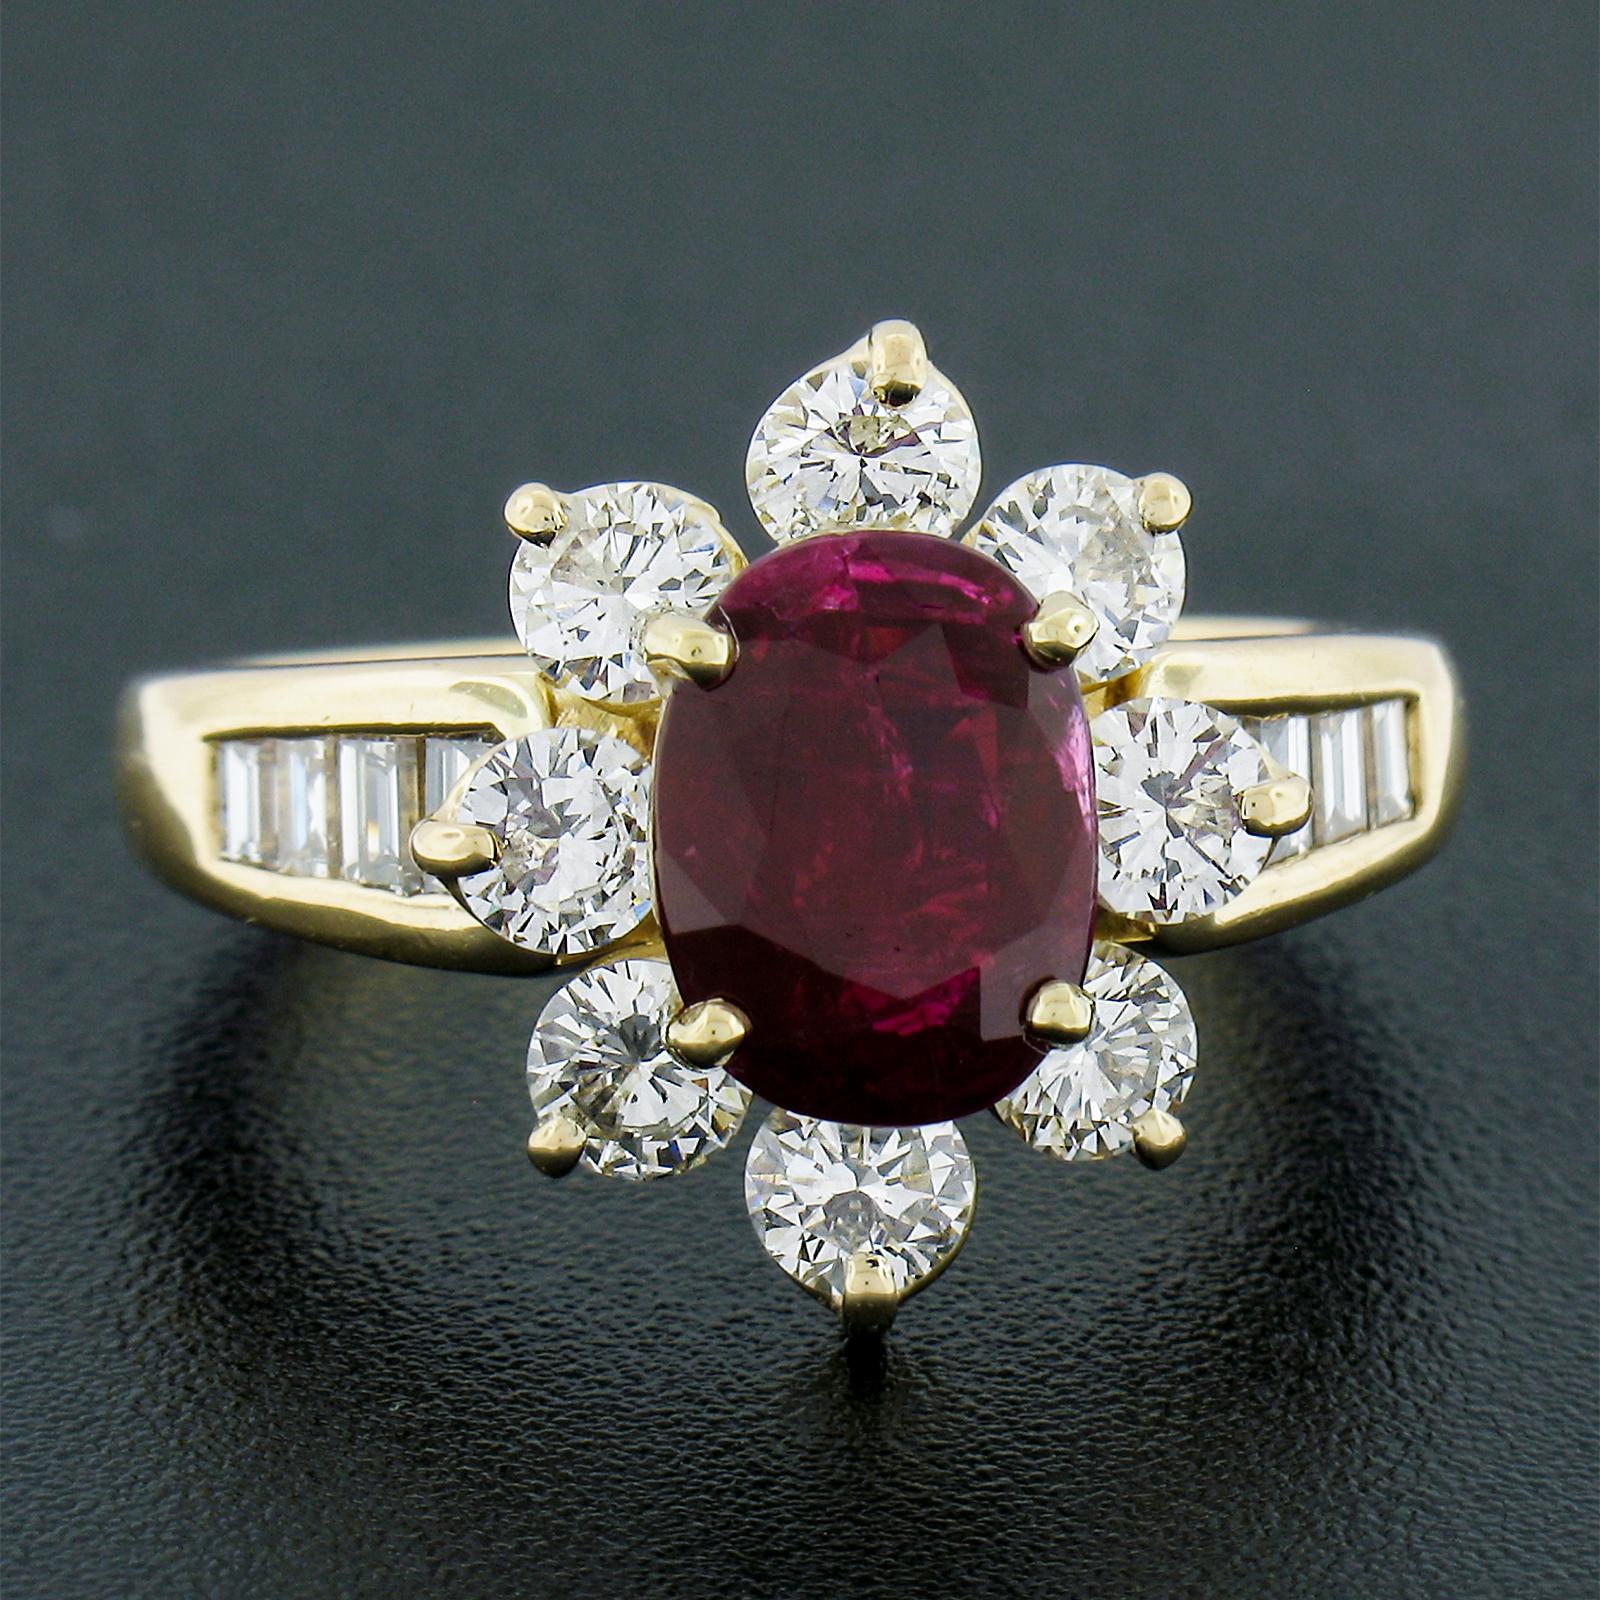 --Stone(s):--
(1) Natural Genuine Ruby - Oval Brilliant Cut - Prong Set - Vivid Red Color - NO HEAT - 1.87ct (exact - certified)
** See Certification Details Below For More Info **
(8) Natural Genuine Diamonds - Round Brilliant Cut - Prong Set - G/H